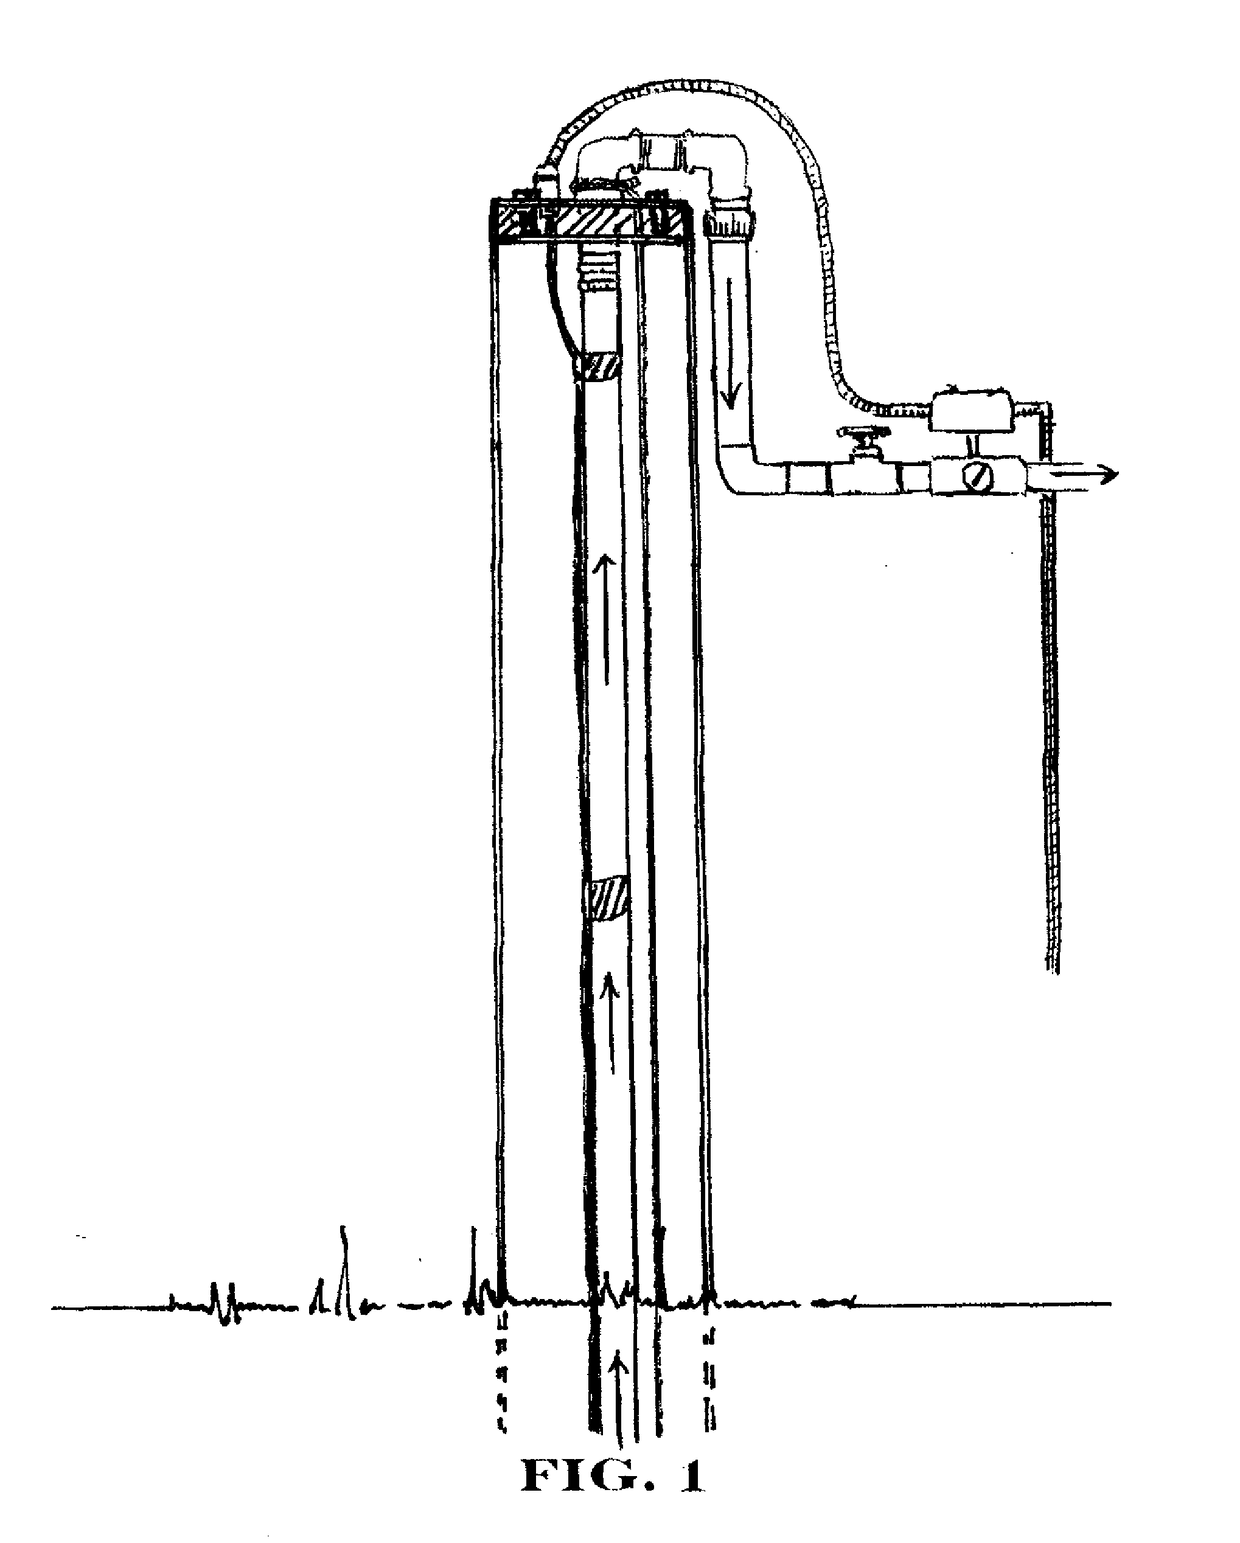 "Gamesaver" method of wellhead angle entry and support for water wells utilizing electric submersible pumps